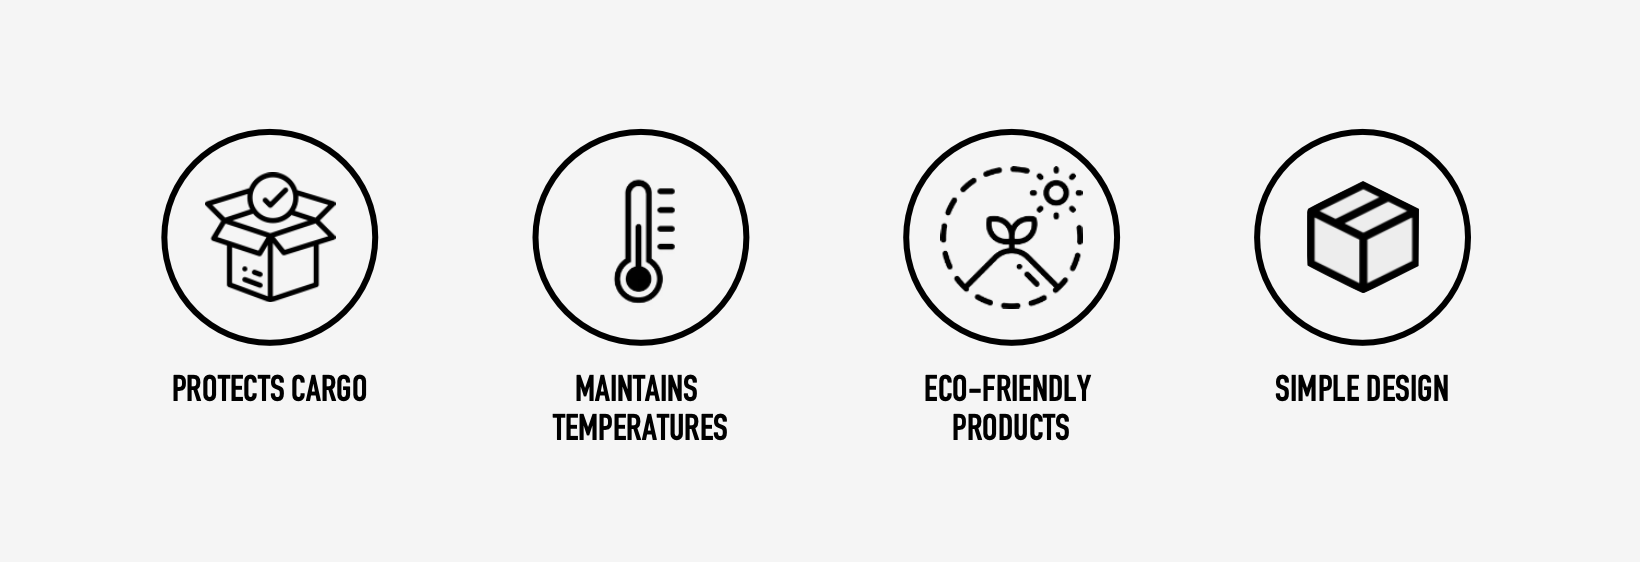 product details diagram - protects cargo, maintains temperatures, eco-friendly, and simple design